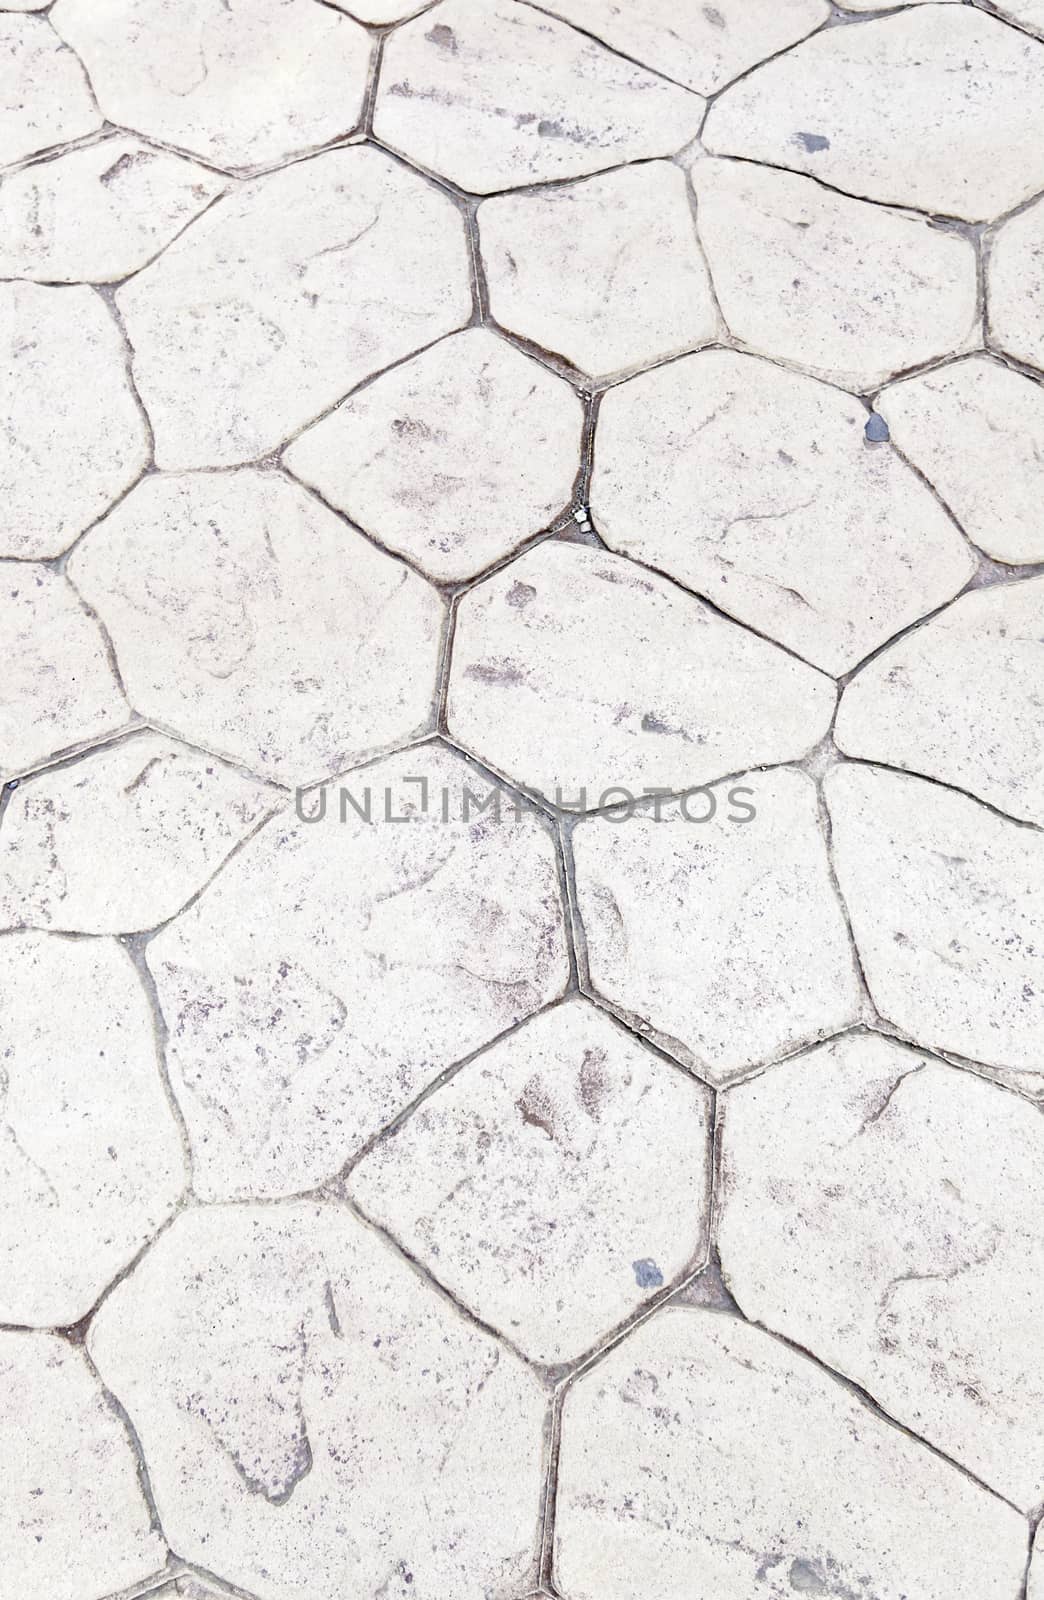 Shaped floor stone floor, the floor decorated detail shaped stones